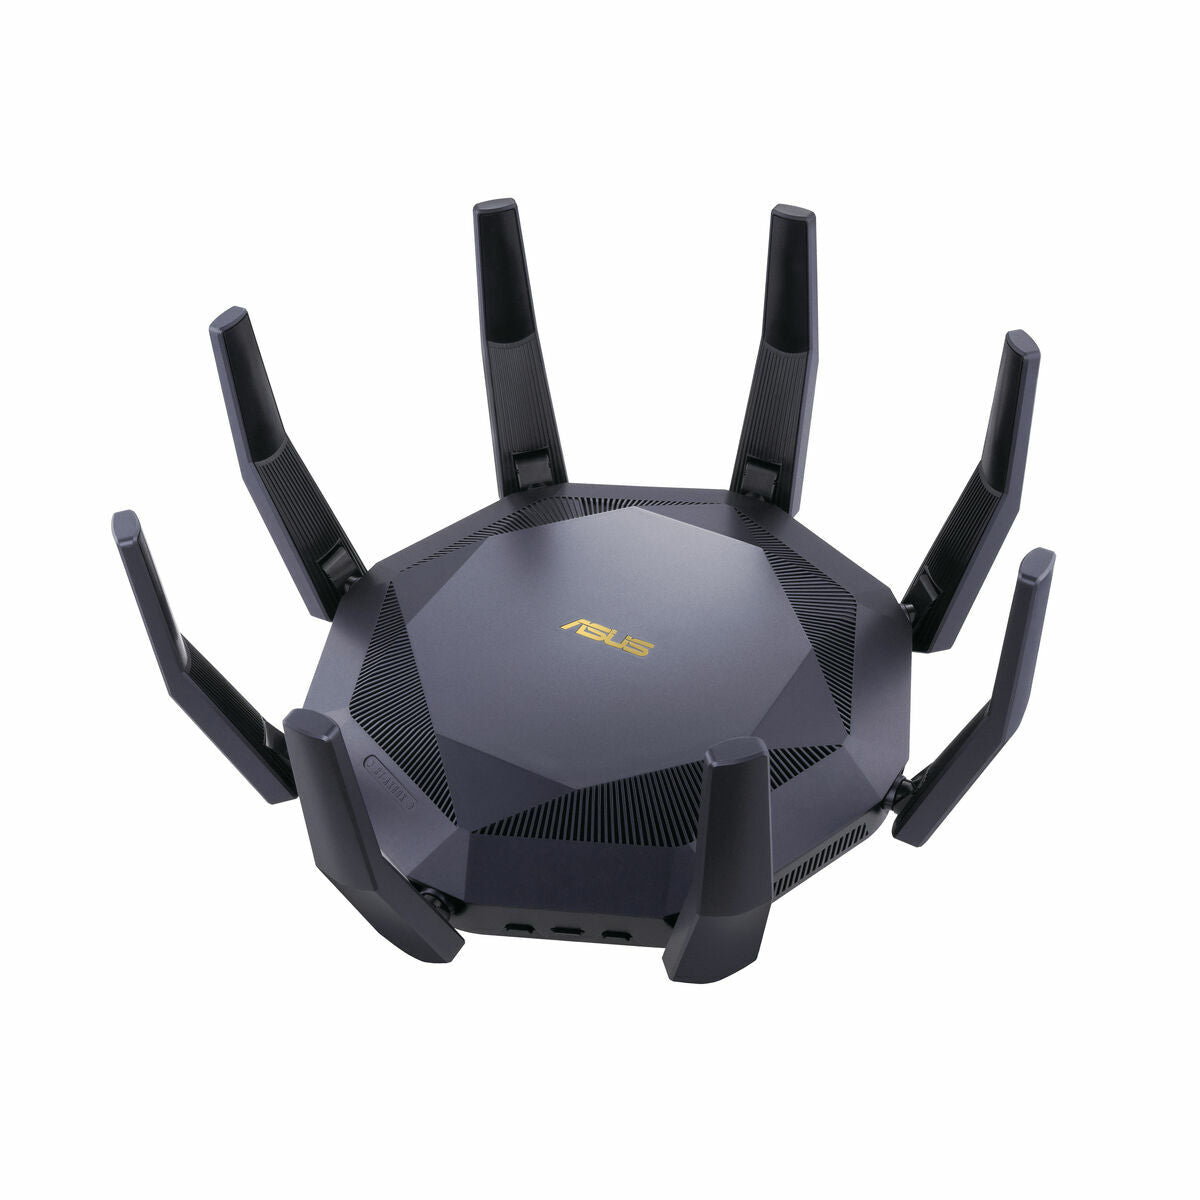 Router Asus 90IG04J1-BM3010, Asus, Computing, Network devices, router-asus-90ig04j1-bm3010, Brand_Asus, category-reference-2609, category-reference-2803, category-reference-2826, category-reference-t-19685, category-reference-t-19914, category-reference-t-21371, Condition_NEW, networks/wiring, Price_300 - 400, Teleworking, RiotNook